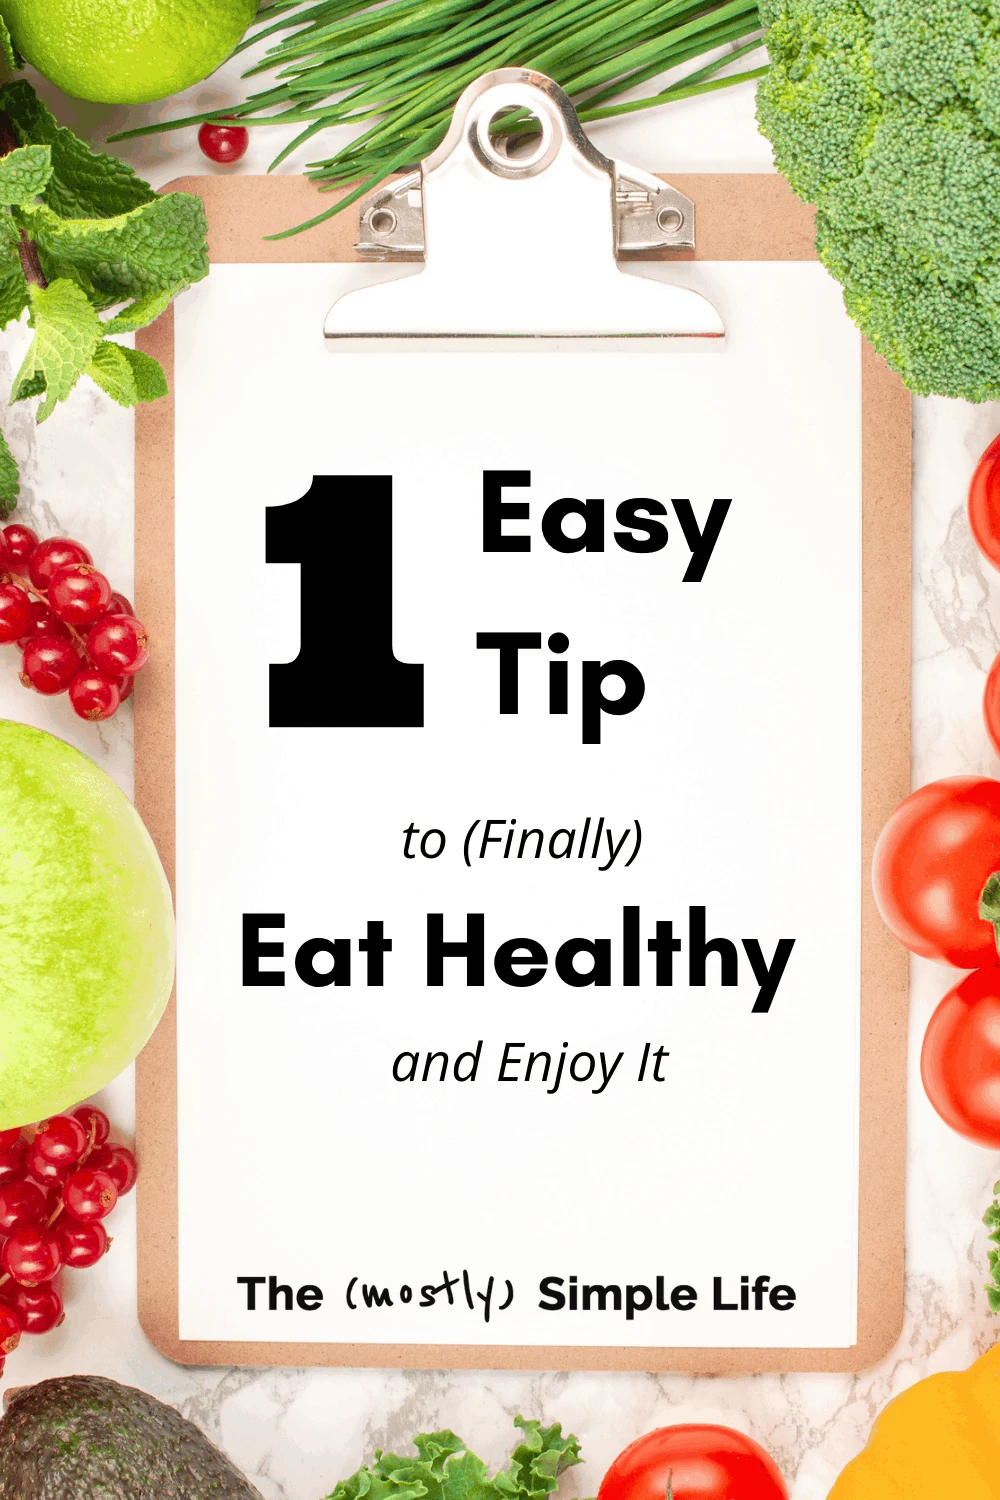 The Best Tip to (Finally) Eat Healthy and Enjoy It